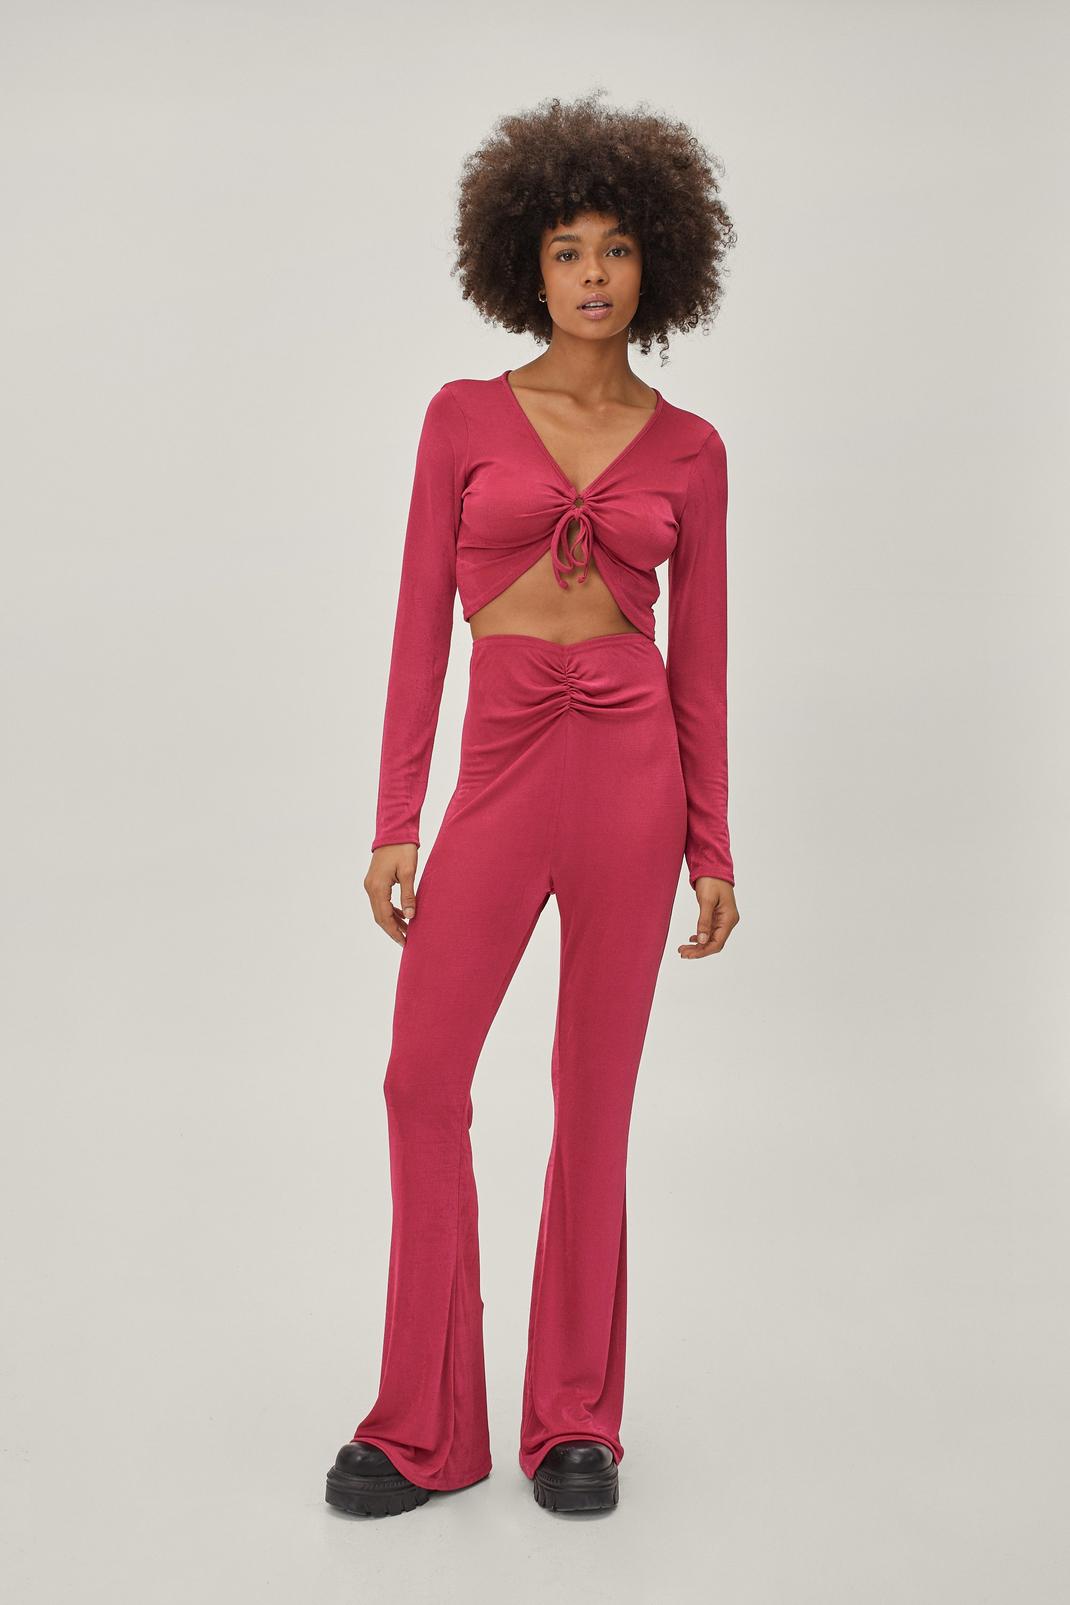 https://media.nastygal.com/i/nastygal/agg14189_hot%20pink_xl/female-hot%20pink-key-hole-ruched-top-and-ruched-flare-pants-set/?w=1070&qlt=default&fmt.jp2.qlt=70&fmt=auto&sm=fit